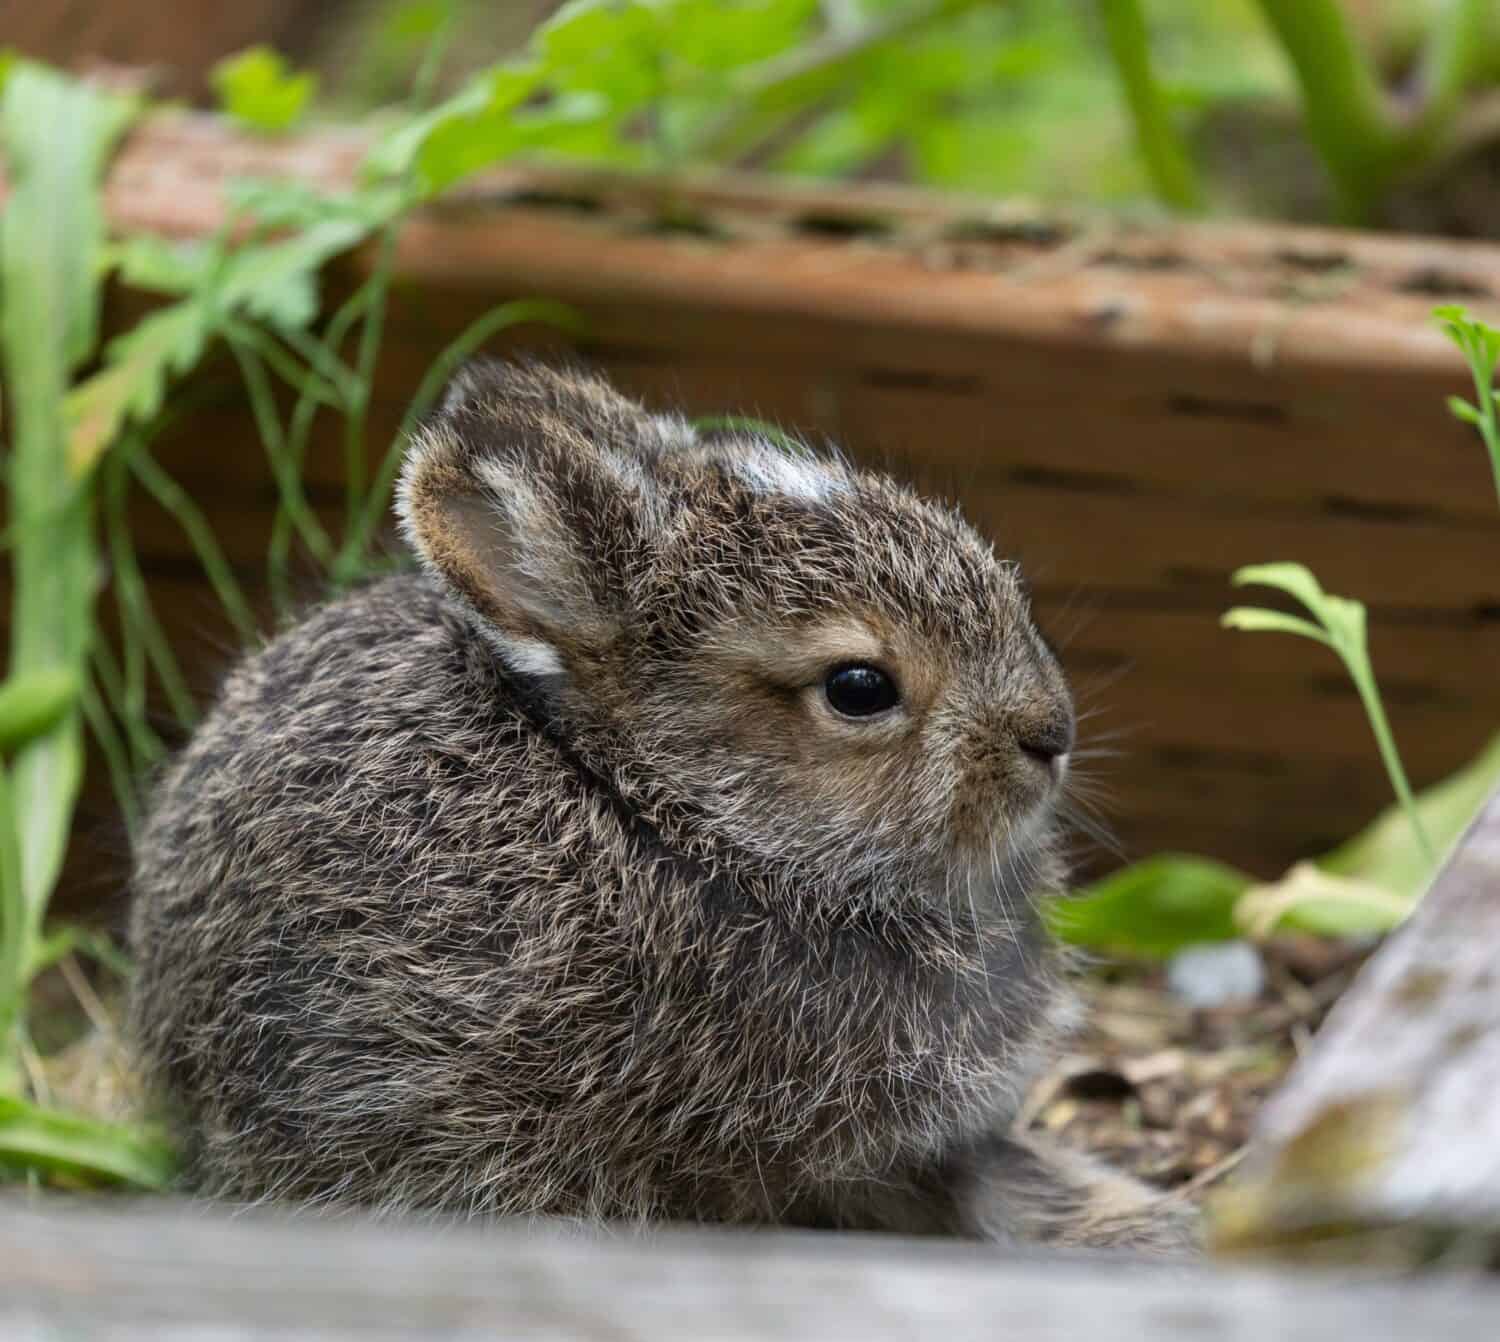 Baby Snowshoe Hare out of the nest.